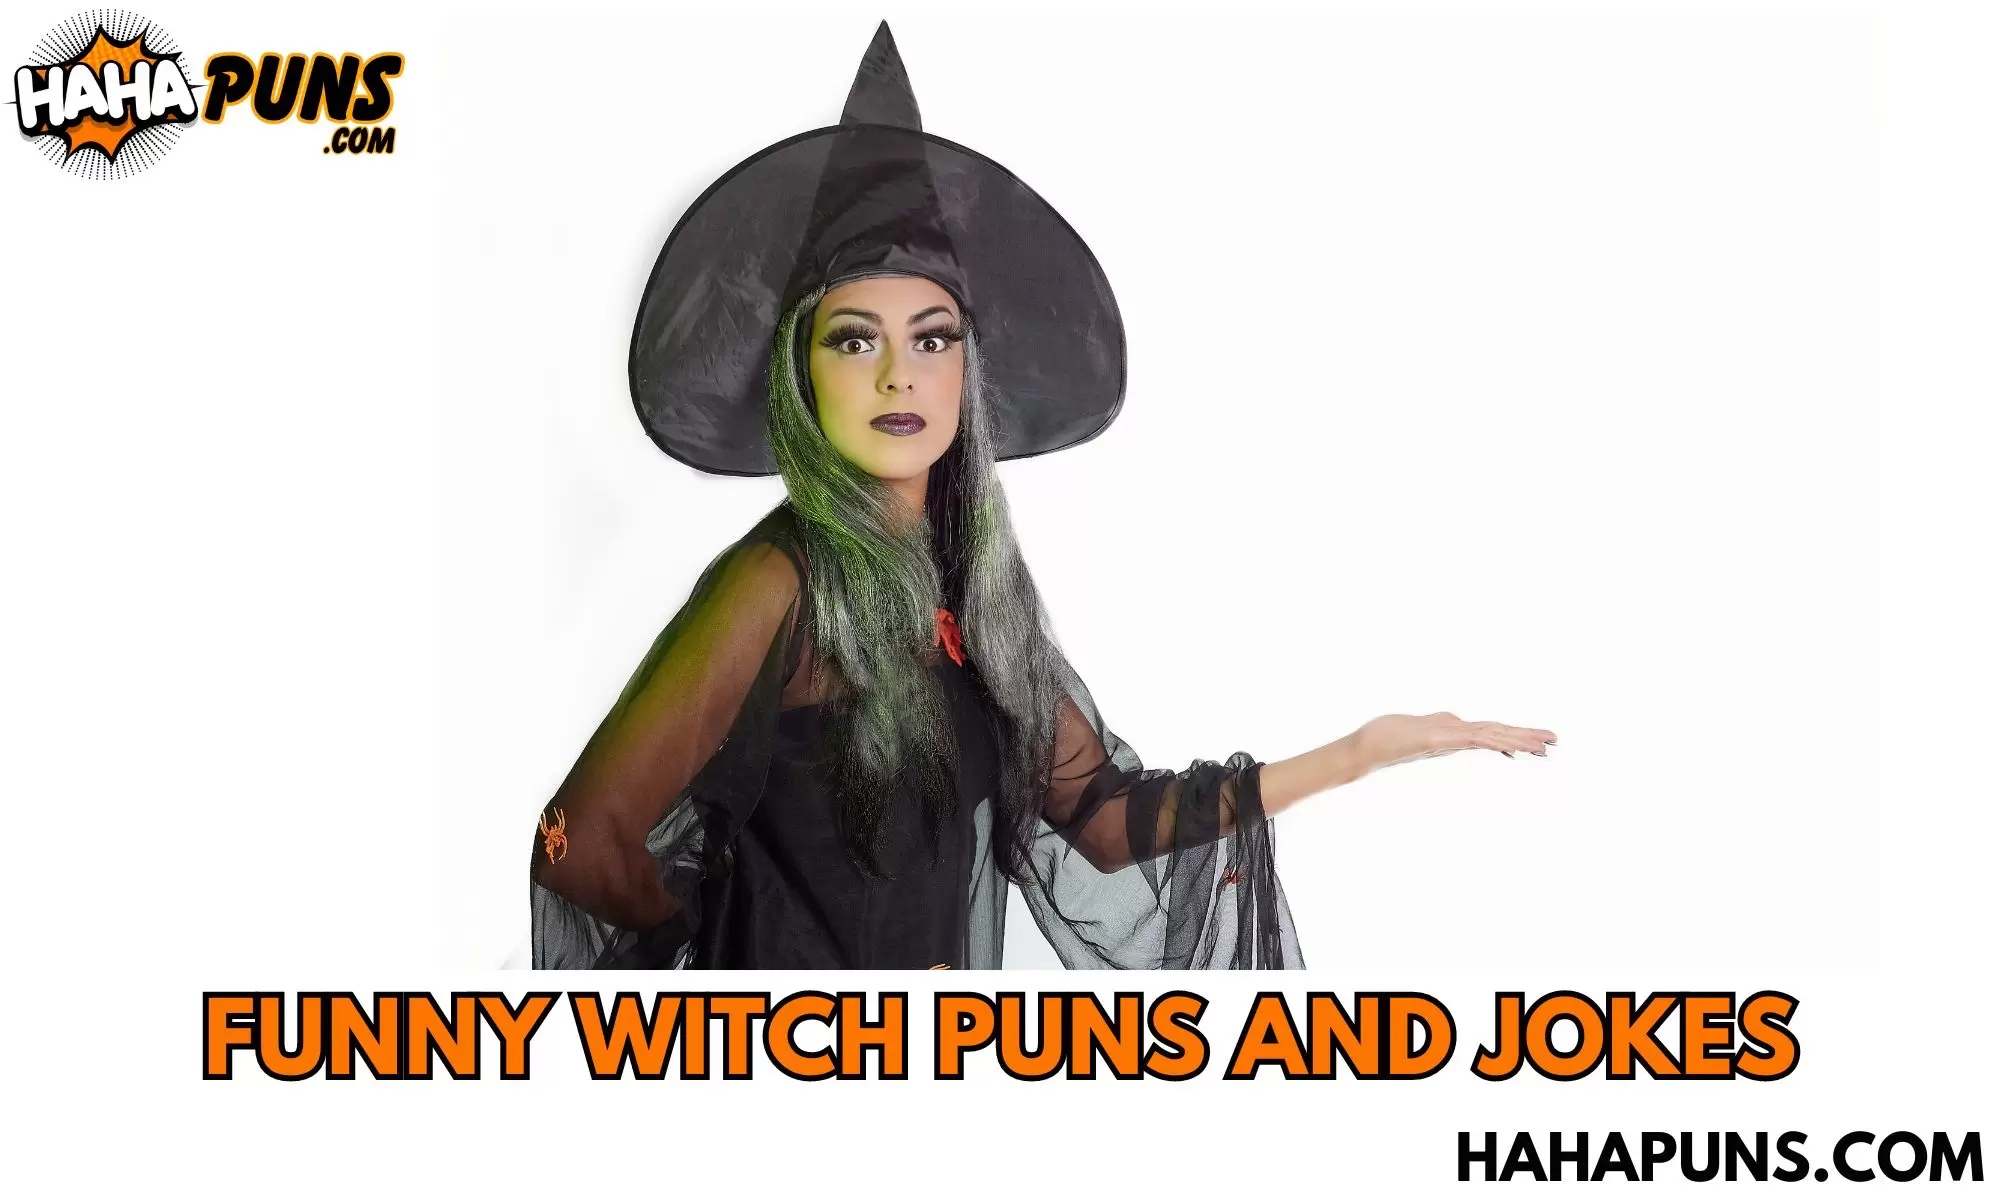 Funny Witch Puns and Jokes